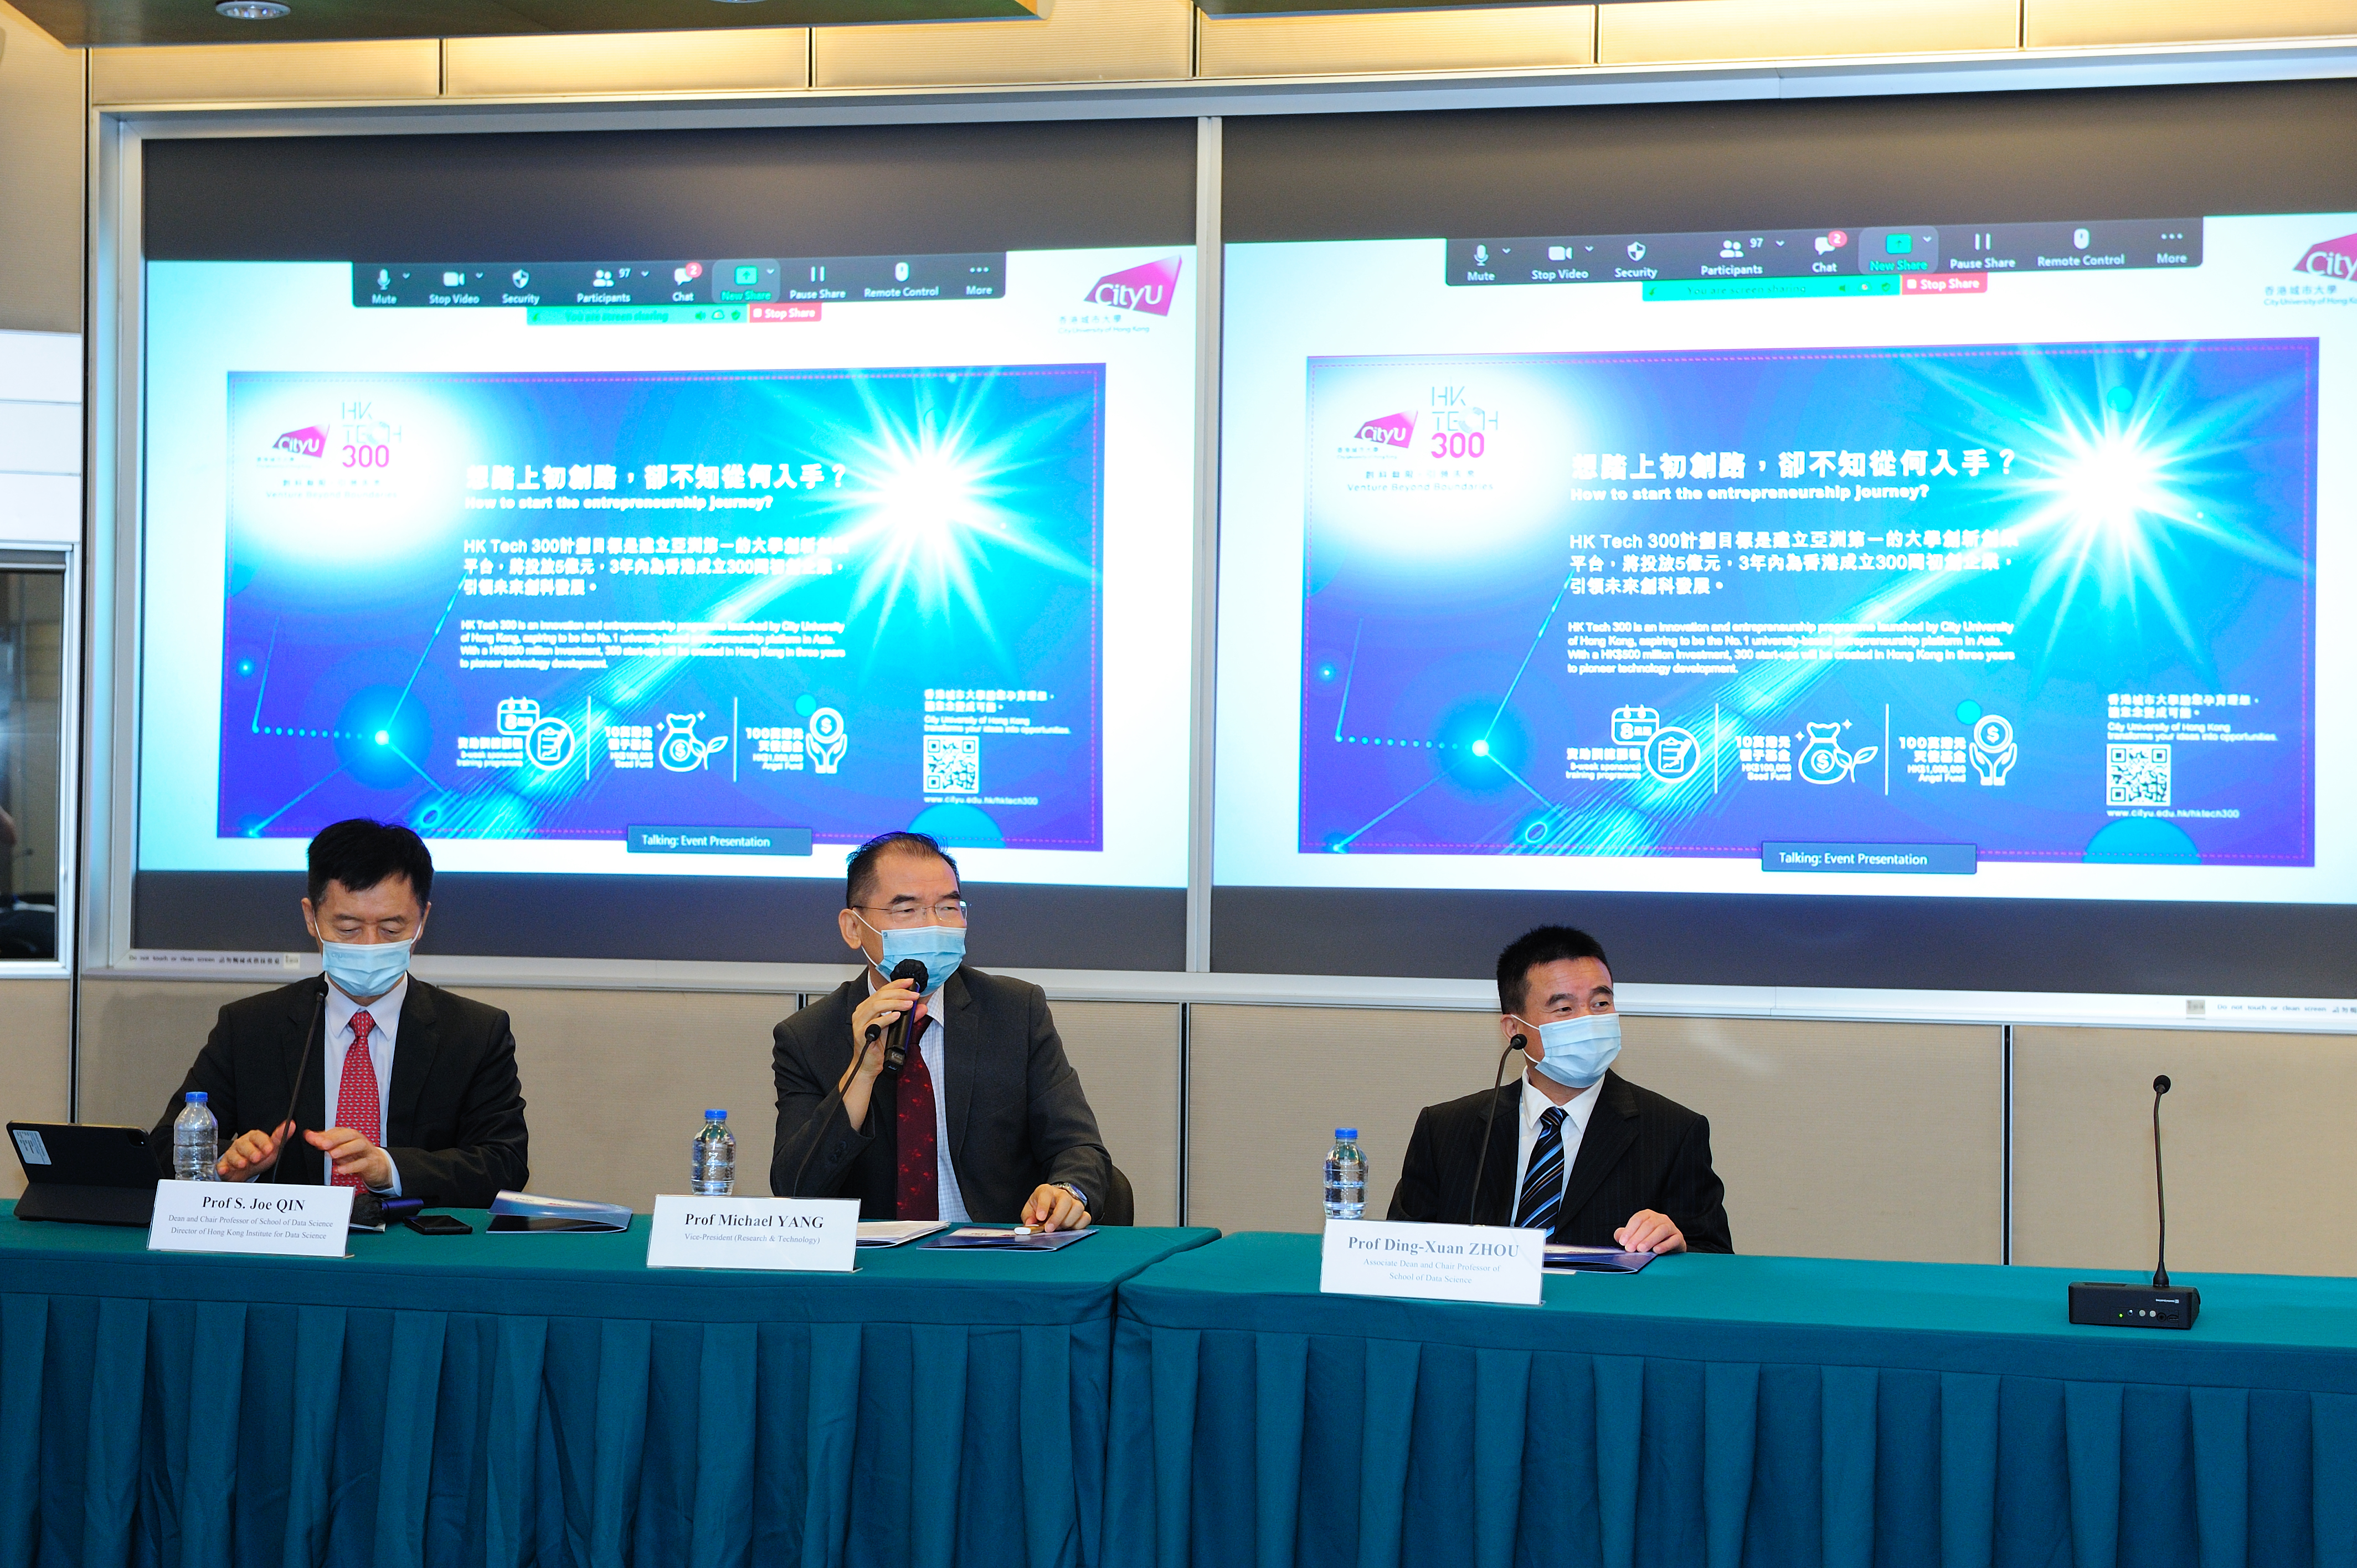 Professor Michael YANG, Vice President (Research and Technology) of CityU, introduced “HK Tech 300”.